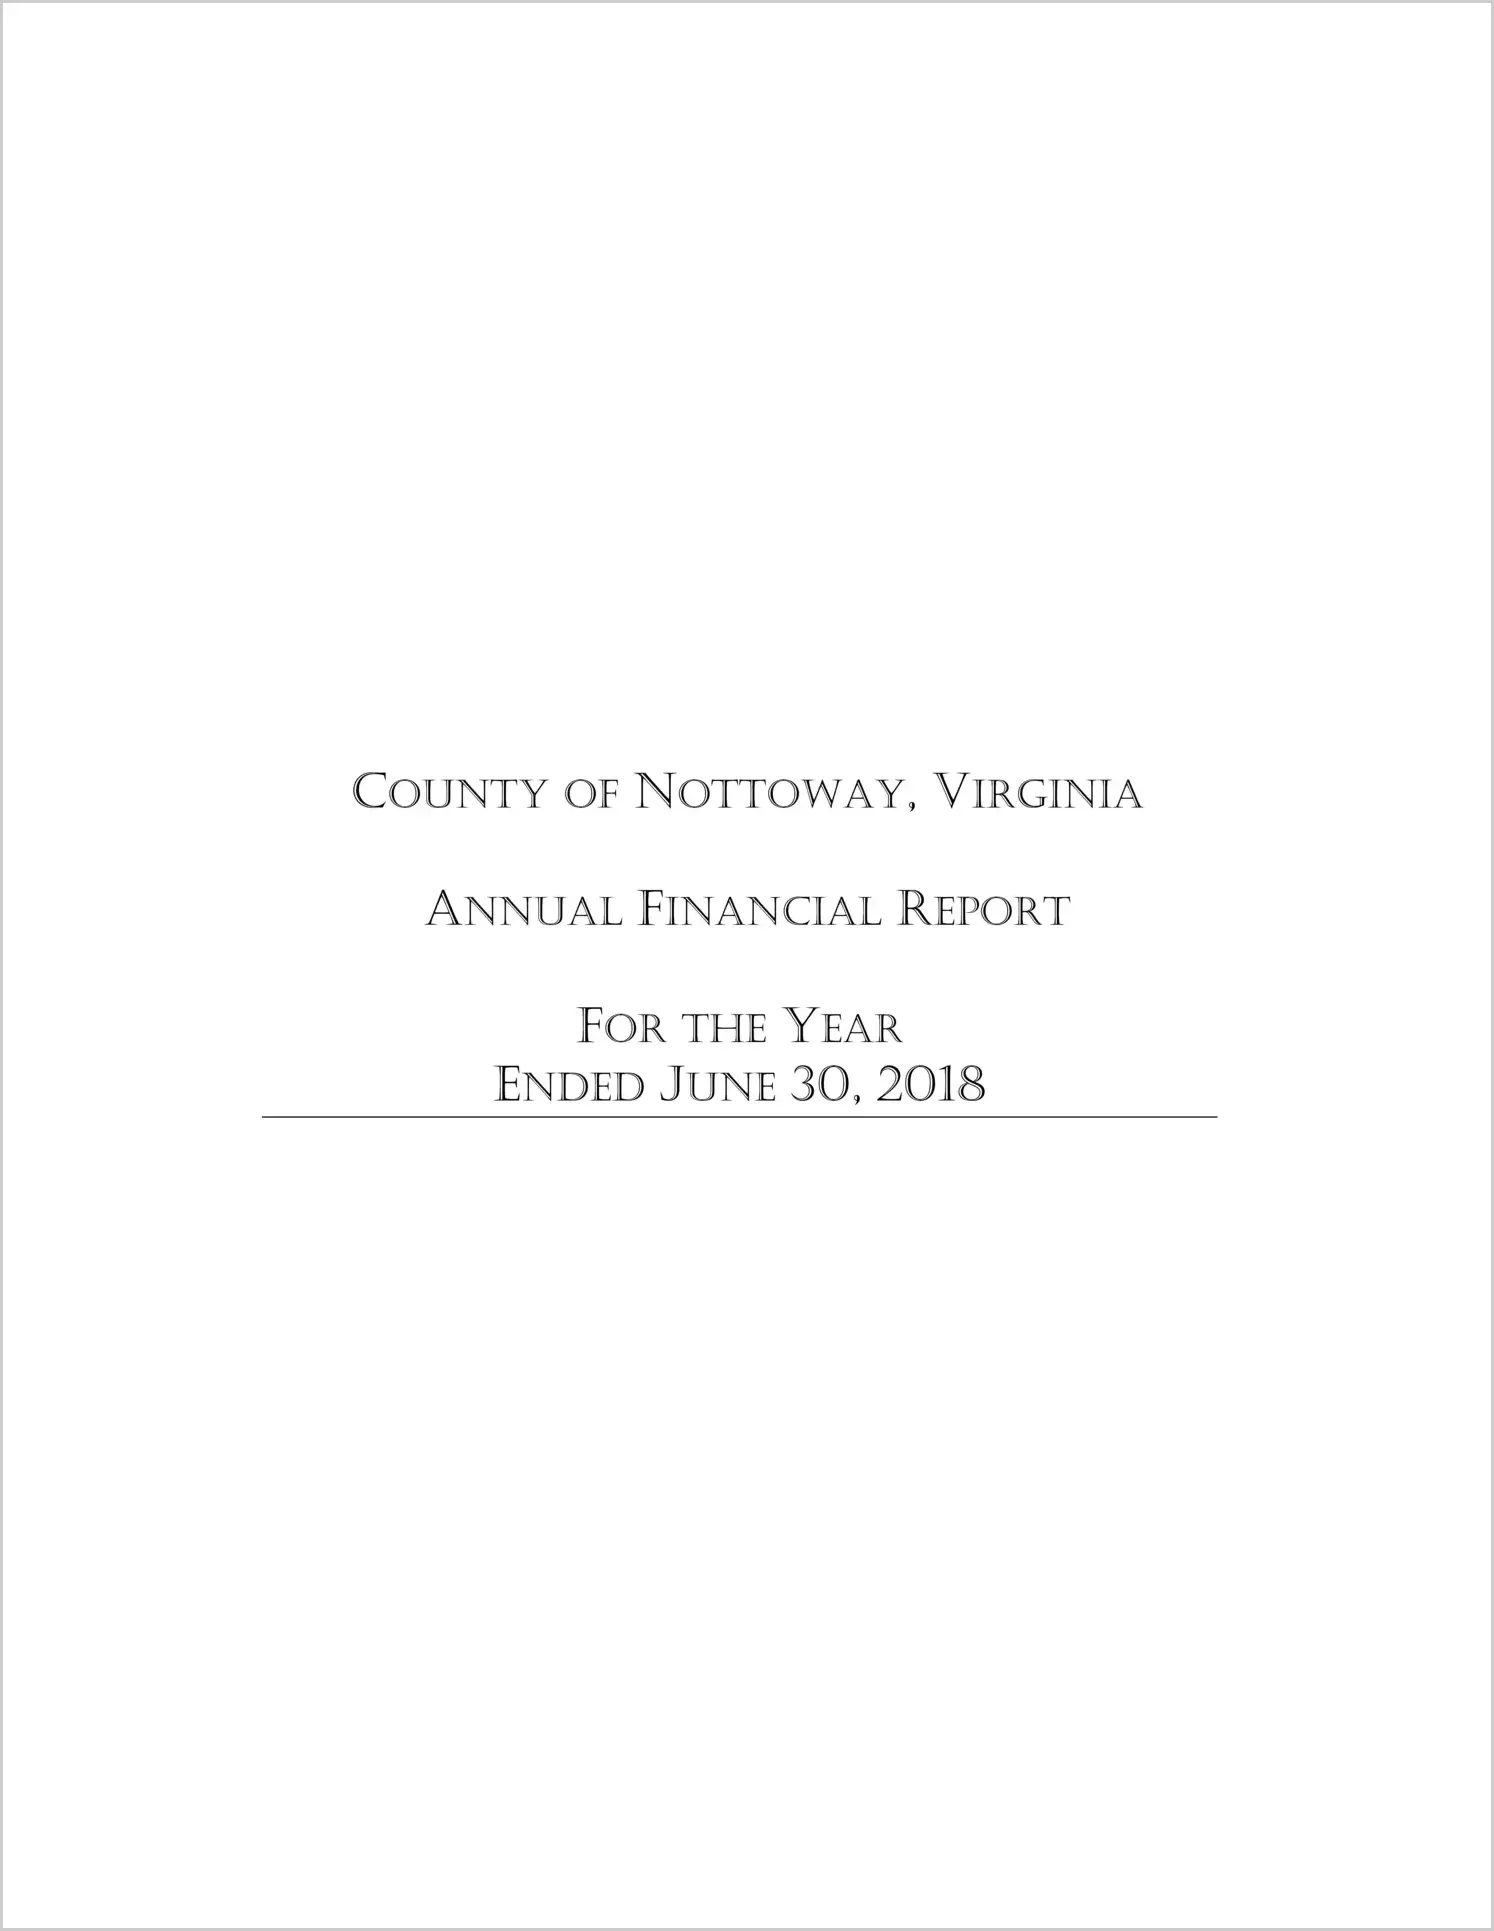 2018 Annual Financial Report for County of Nottoway